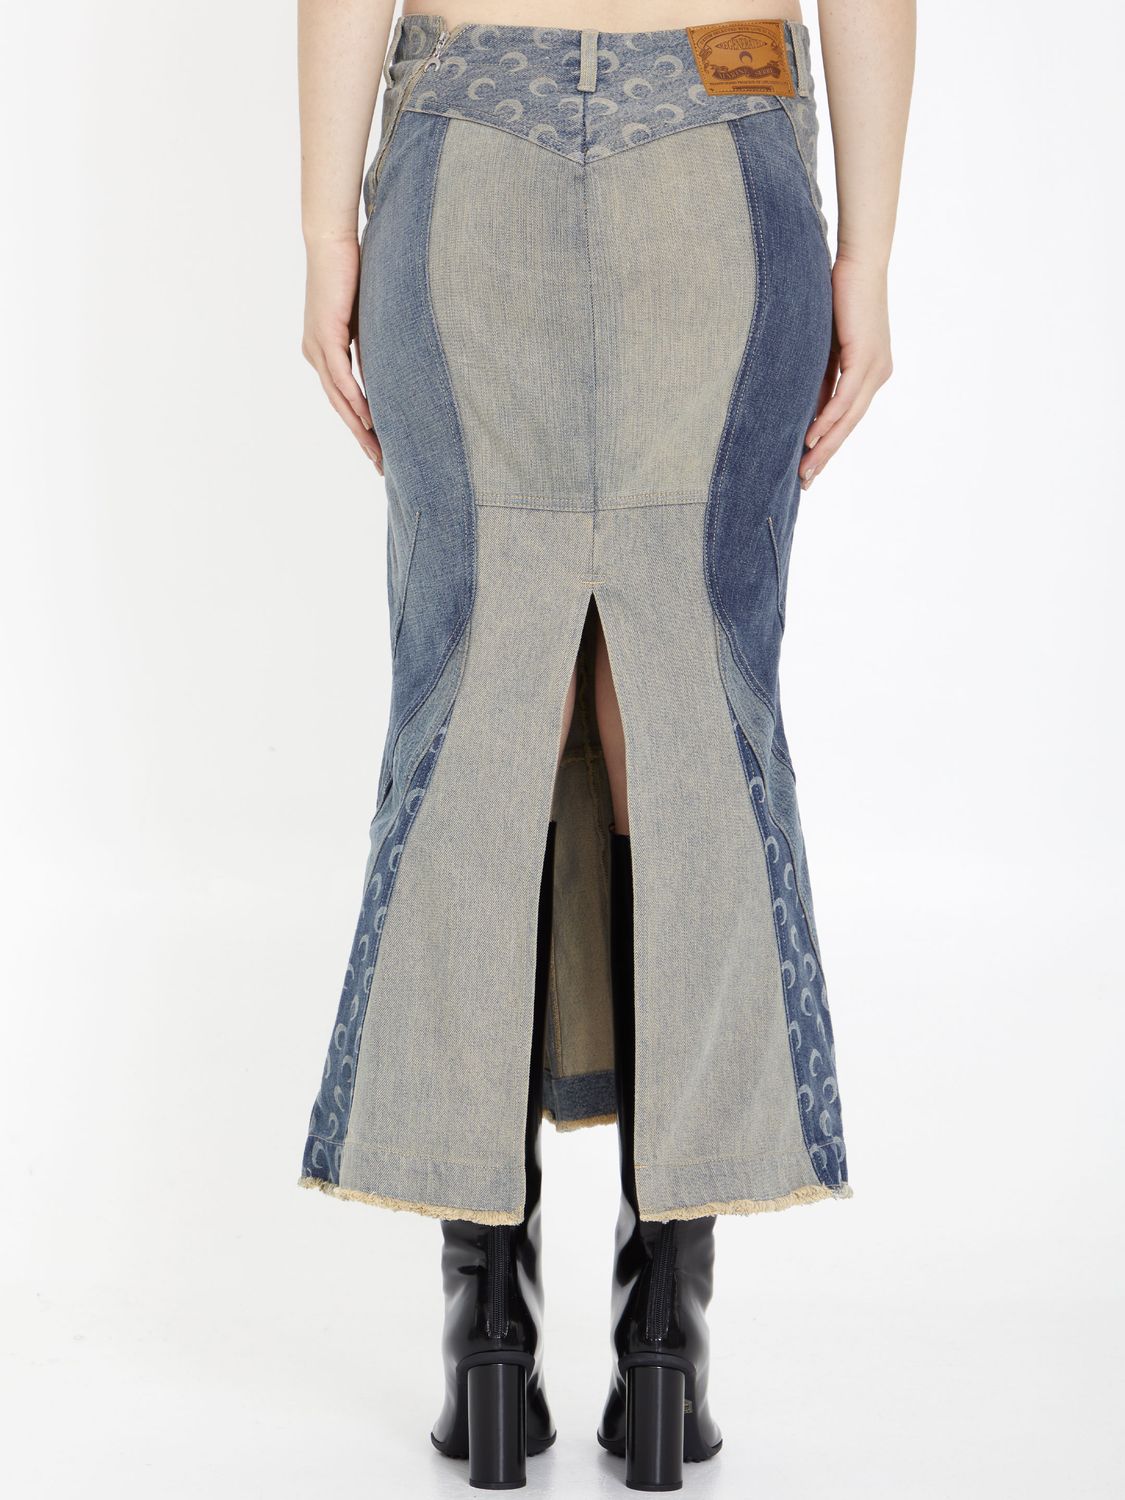 MARINE SERRE Grey Denim Flared Skirt with All Over Moon Print for Women